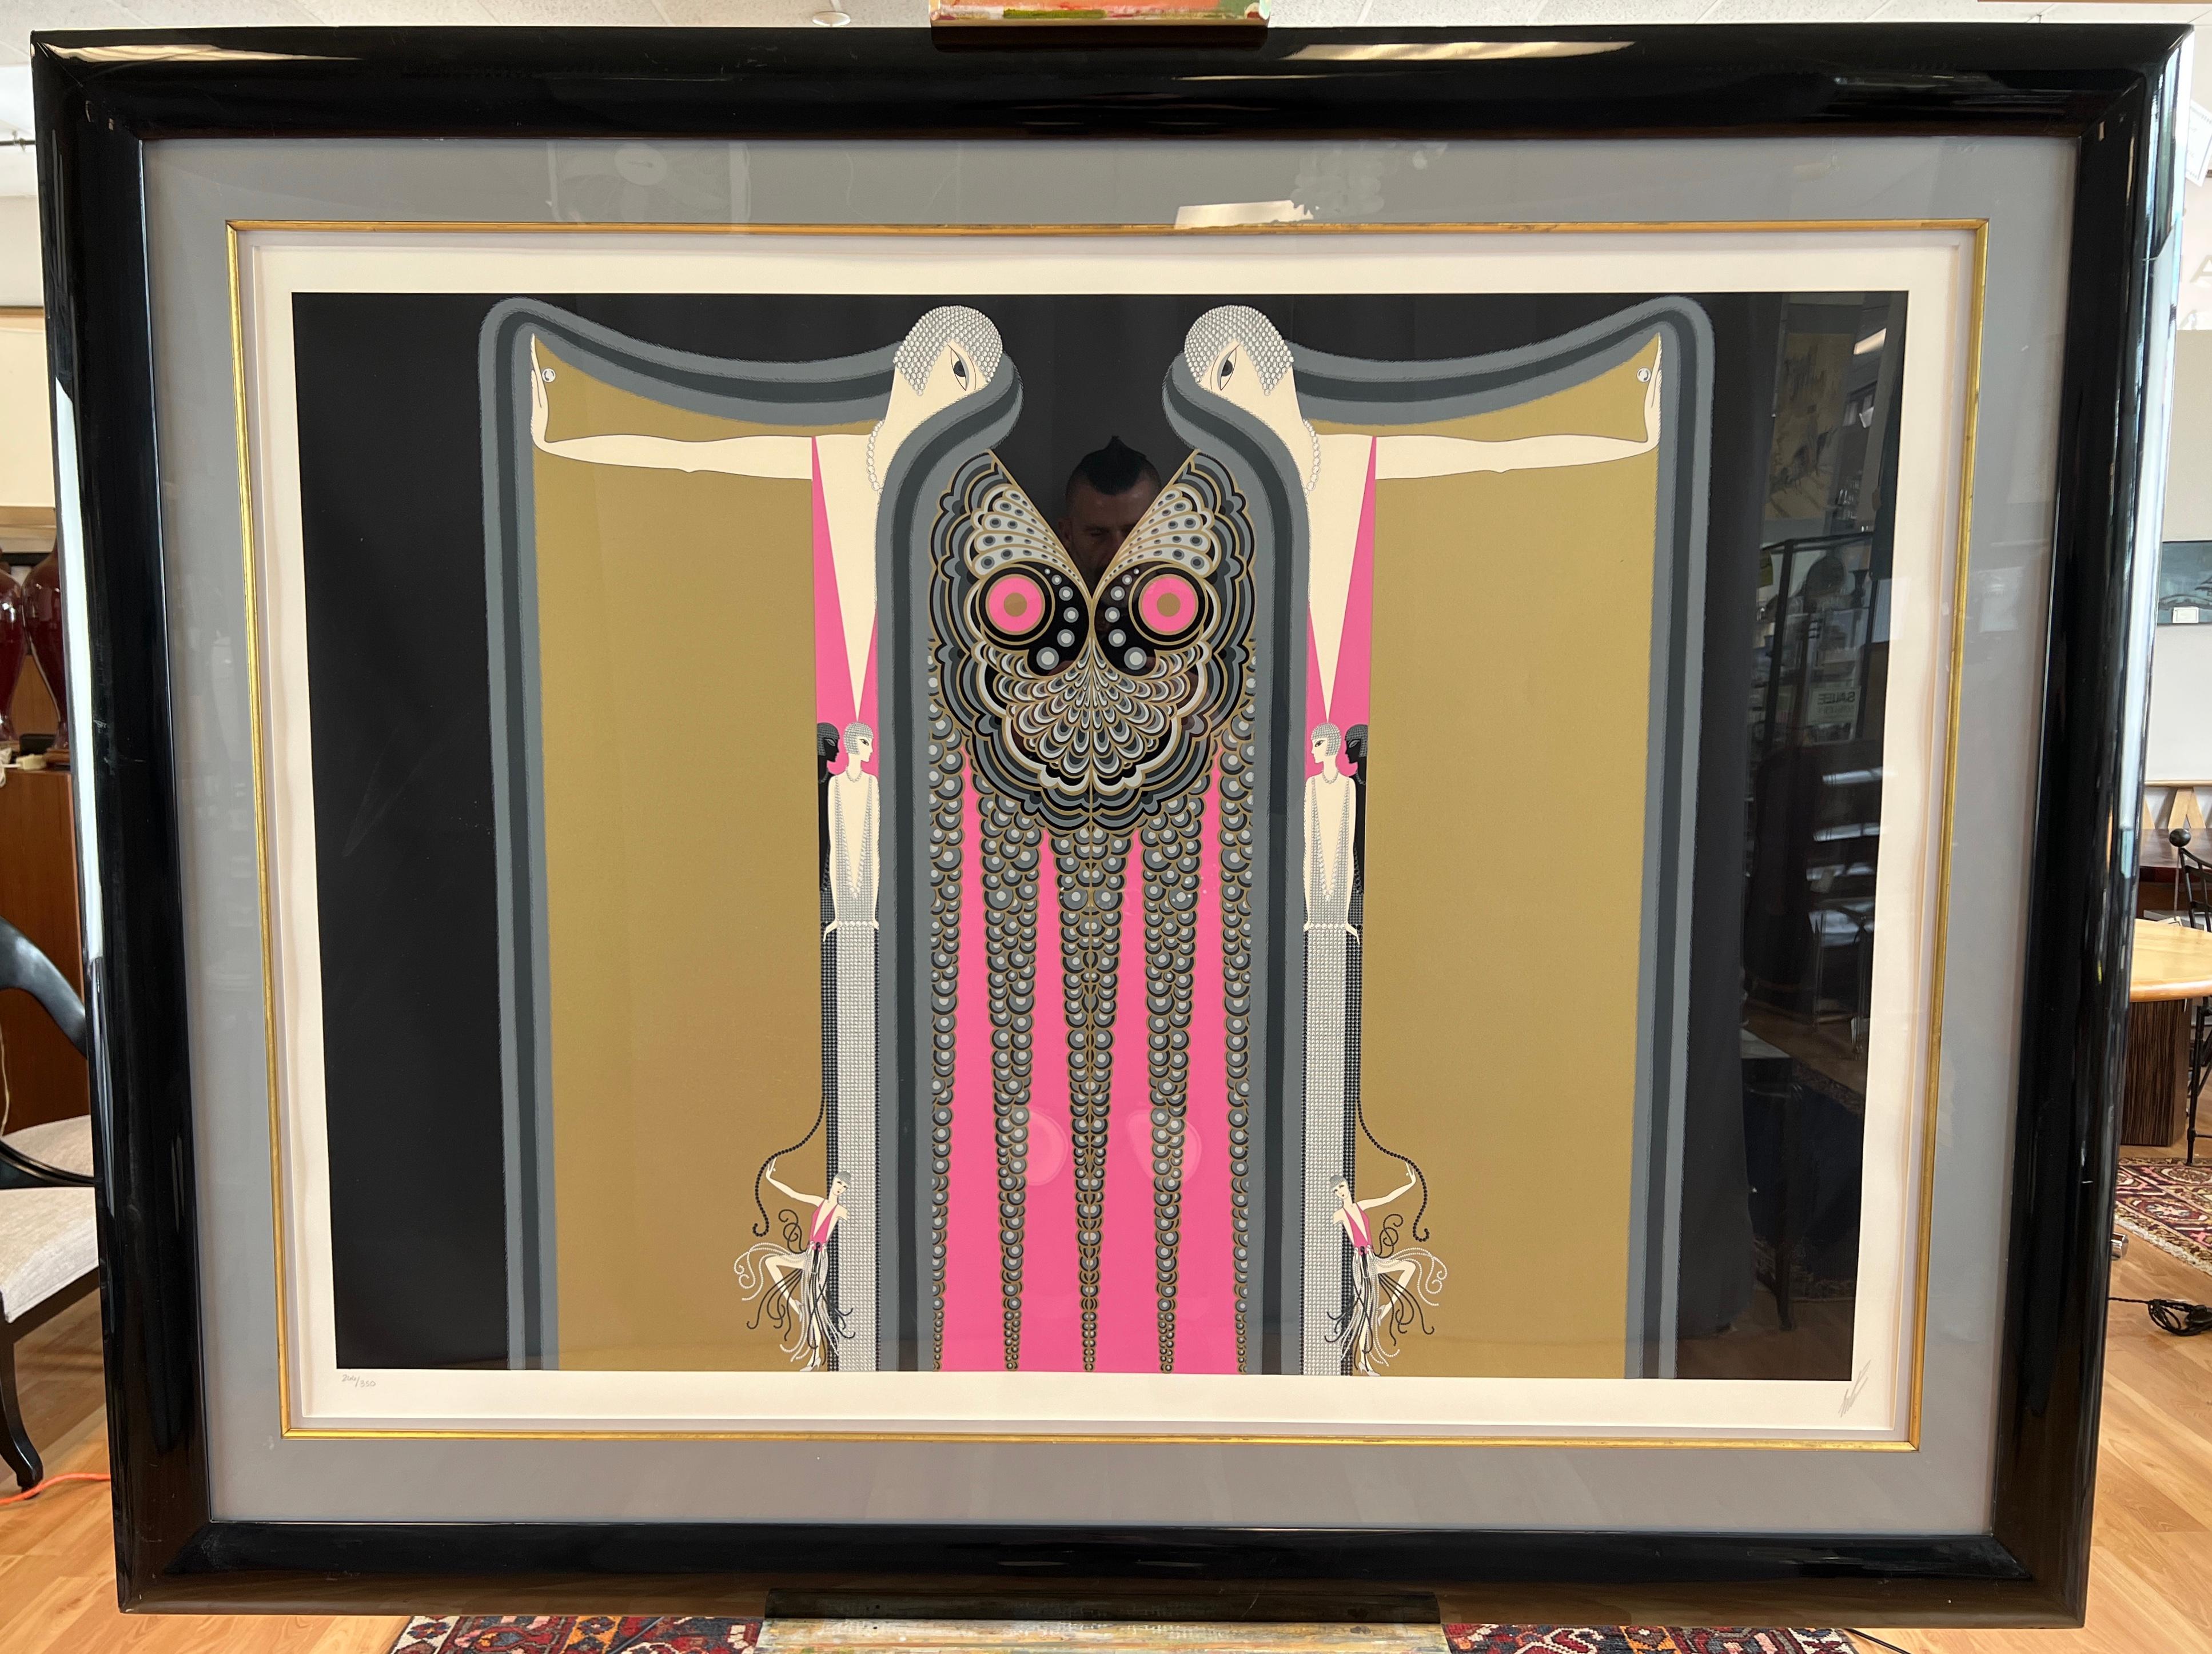 An epically scaled and immaculately executed 1981 framed serigraph of “Twin Sisters” by Erté, hand-signed and numbered by the artist.

A strikingly beautiful and captivating work by Erté, this original edition of “Twin Sisters” (E-414) serves as